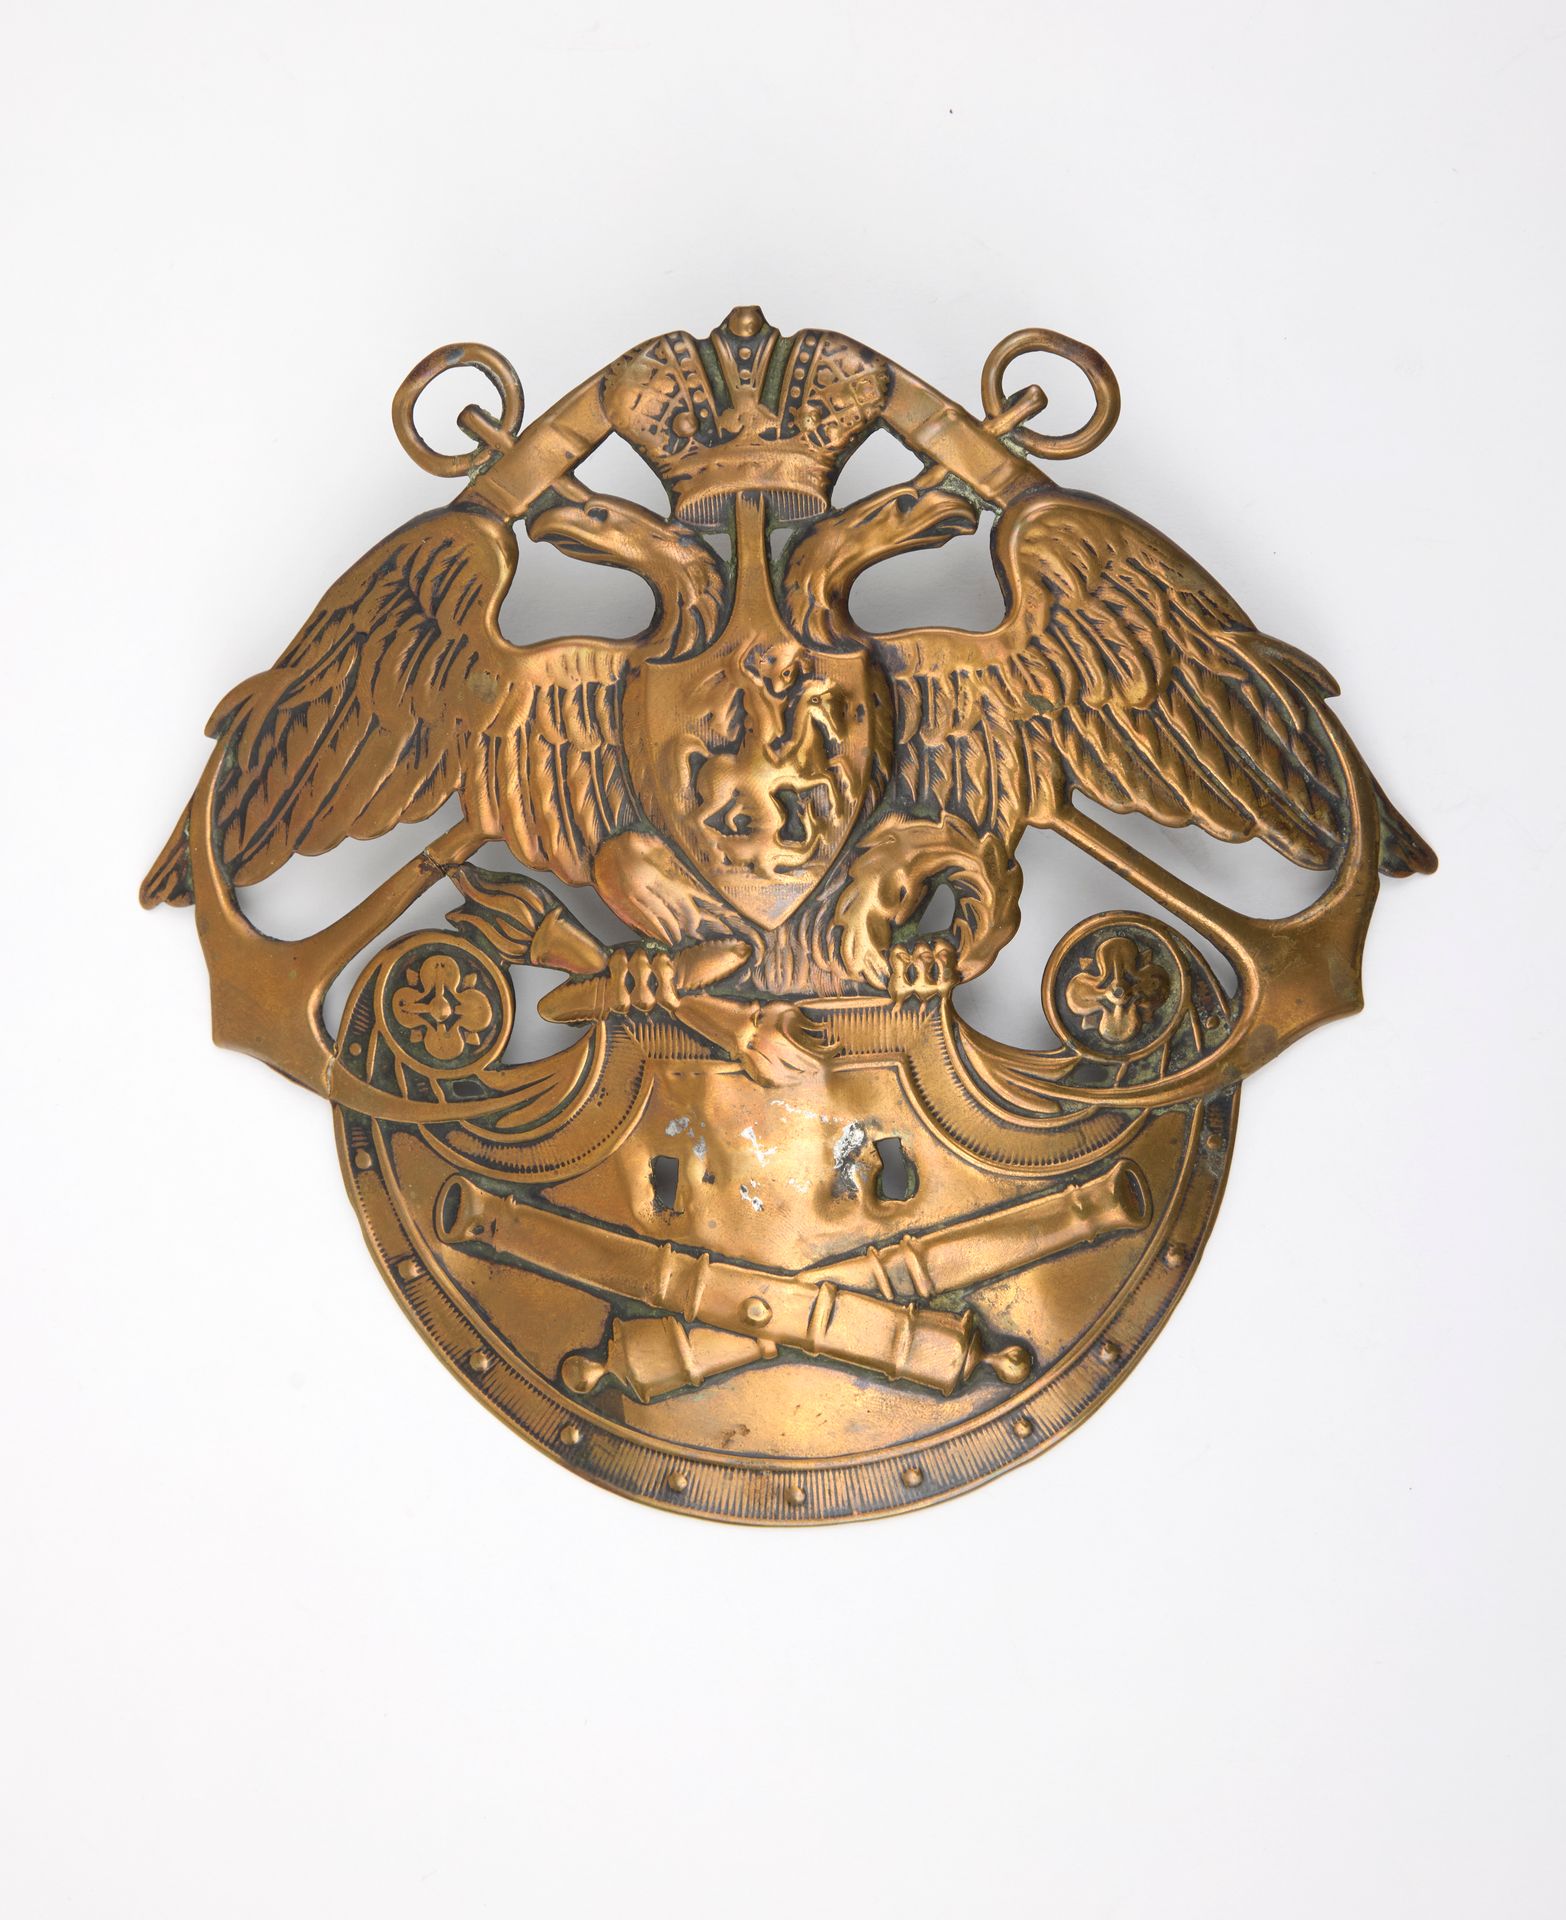 Null [IMPERIAL ARMY]
LOT: 1) Russian marine artillery shako plate. Embossed bron&hellip;